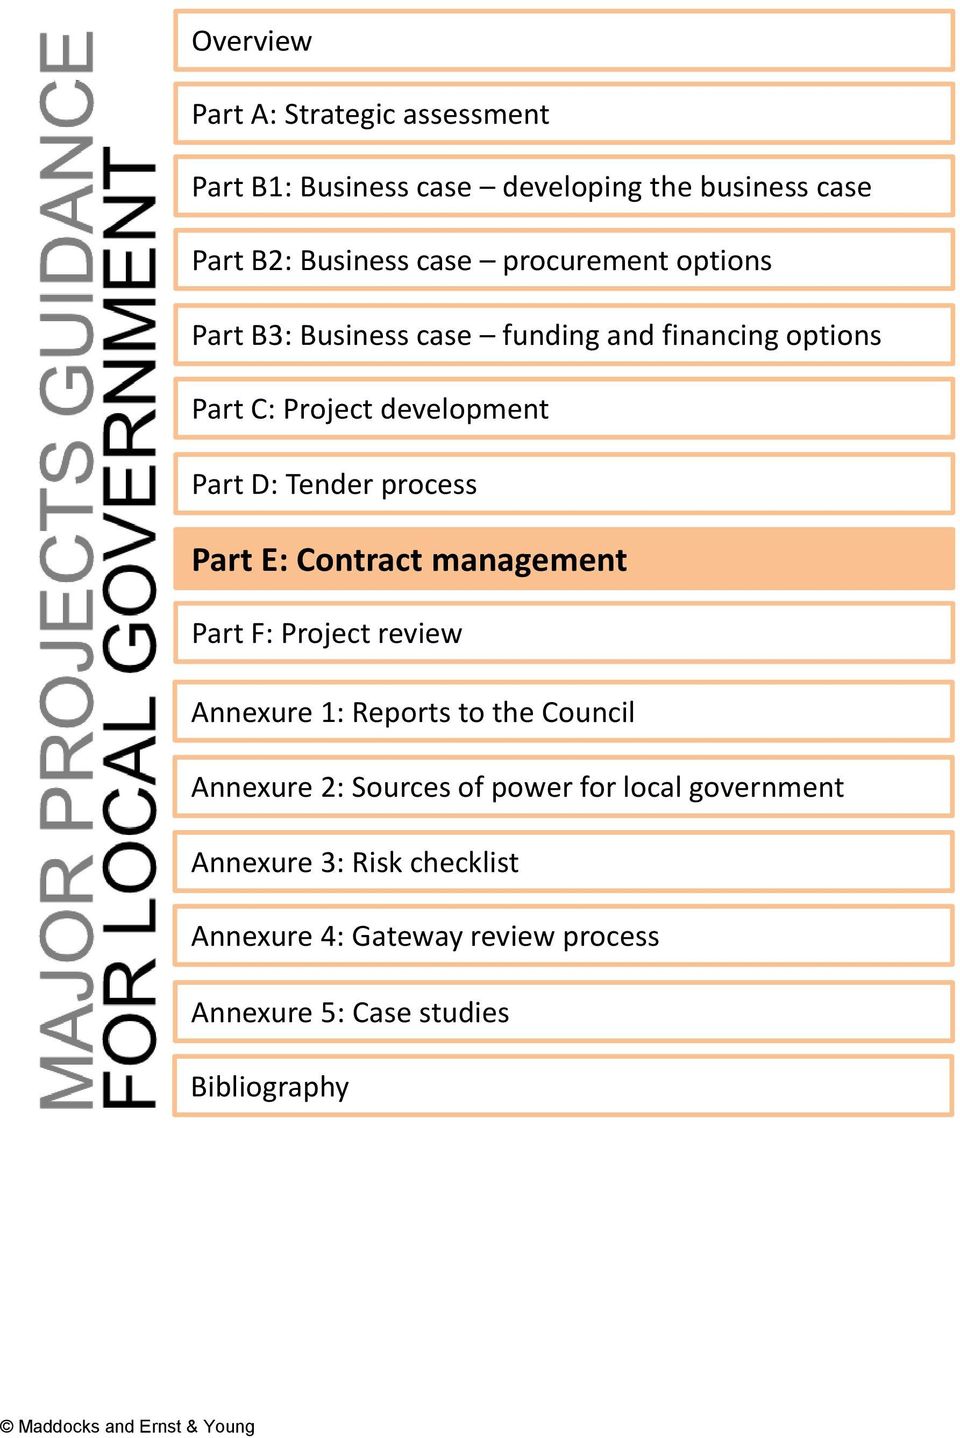 Contract management Part F: Project review Annexure 1: Reports to the Council Annexure 2: Sources of power for local